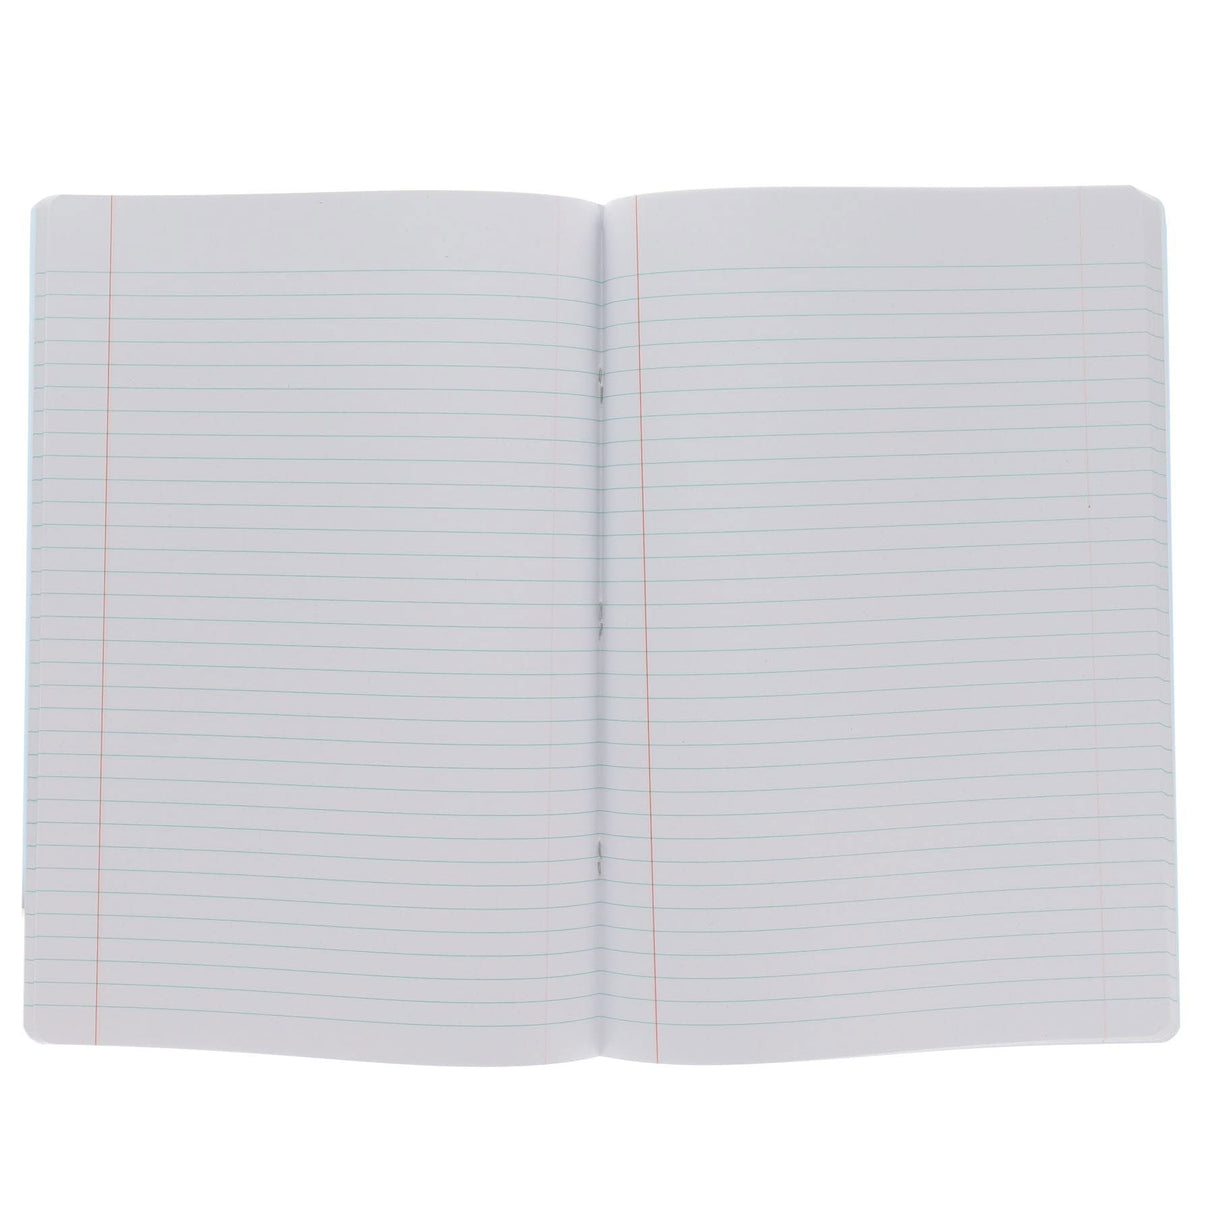 Premto Pastel Multipack | A4 Durable Cover Manuscript Book - 120 Pages - Pack of 5 | Stationery Shop UK